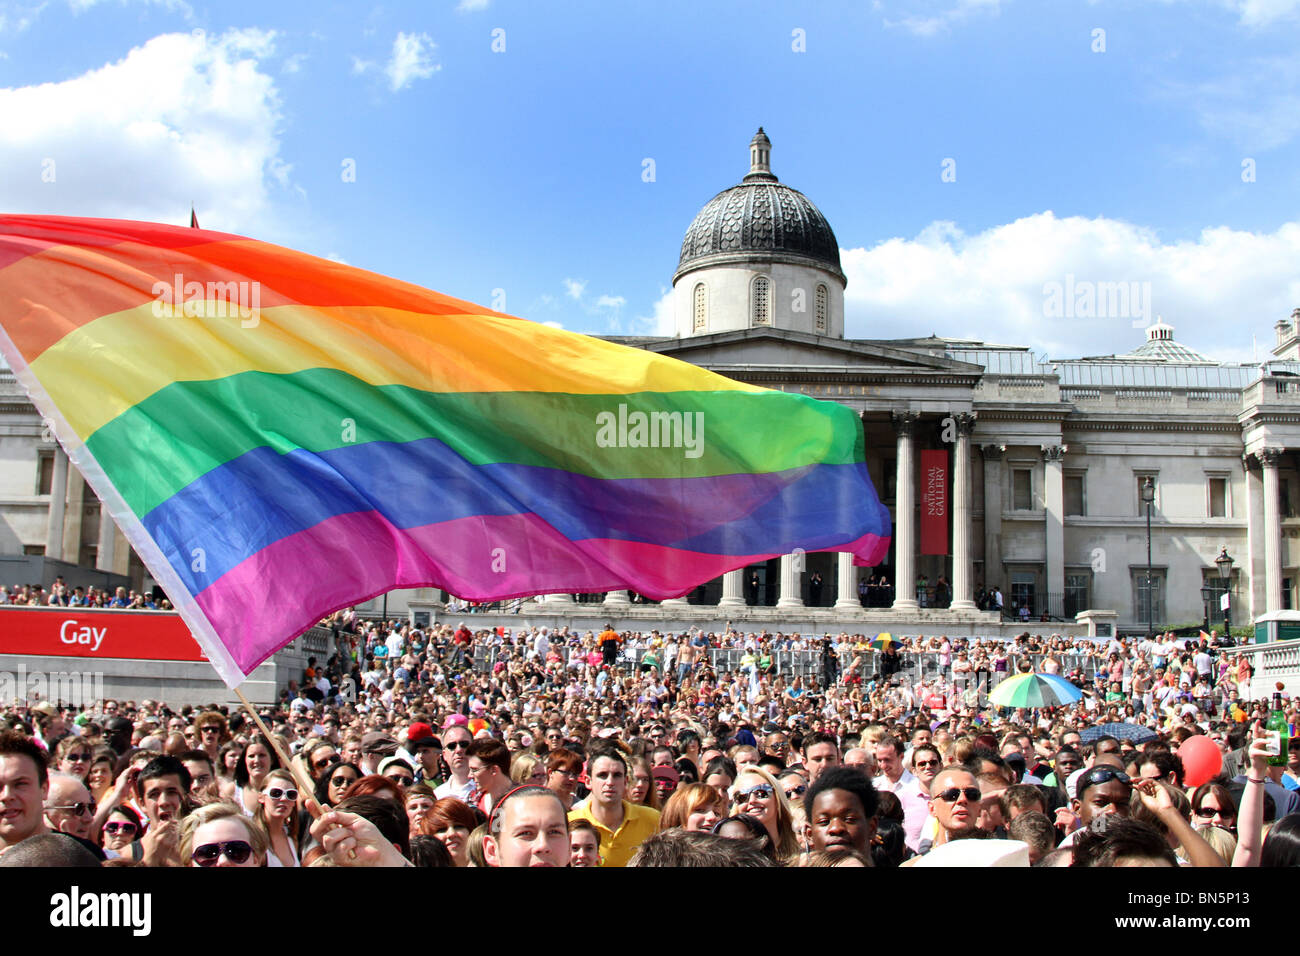 Rainbow flag and crowd in Trafalgar Square at the 40th Anniversary of Pride - Gay Pride Parade in London, 3rd July 2010 Stock Photo